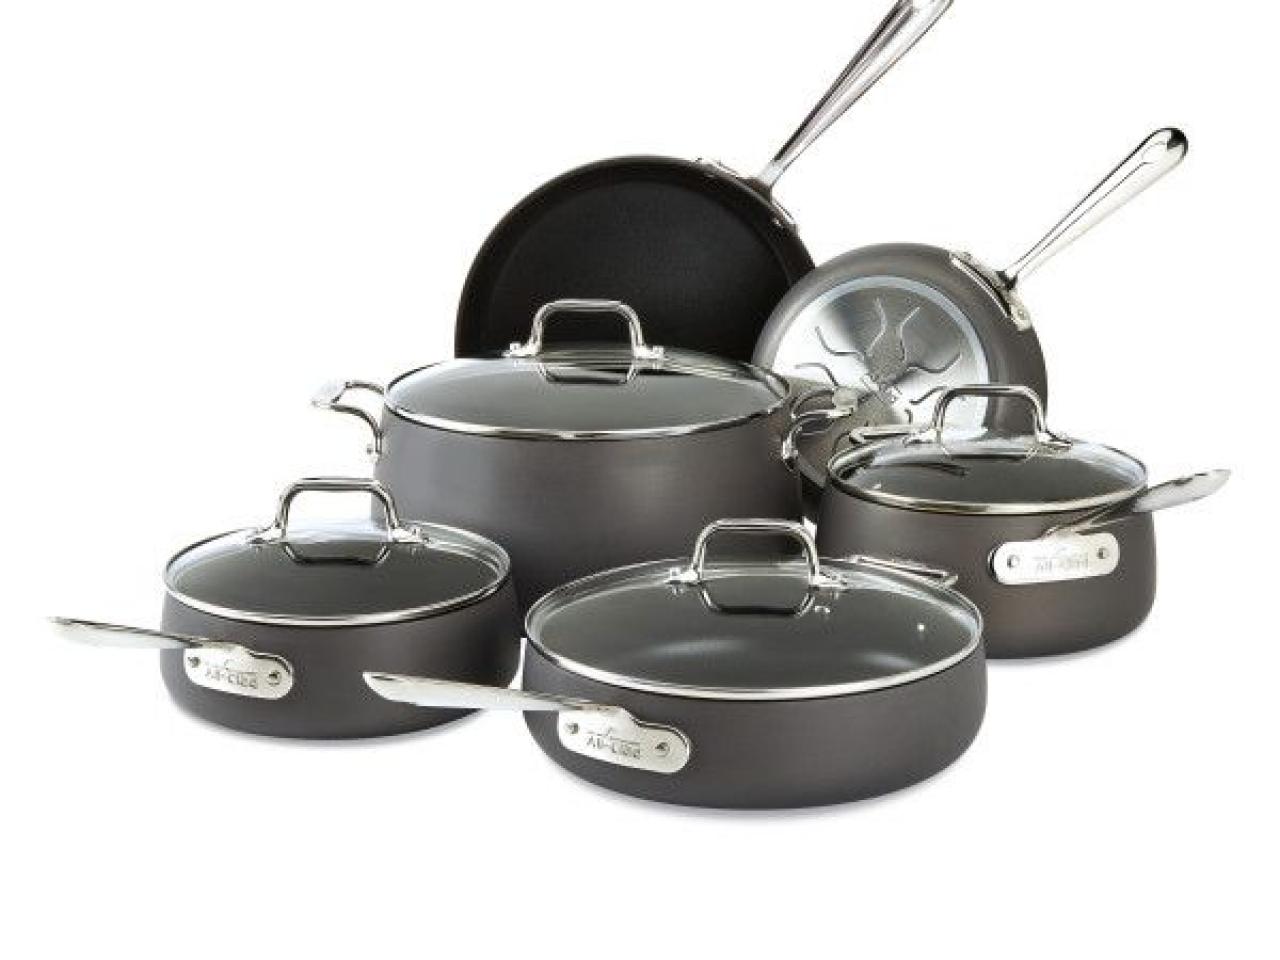 https://food.fnr.sndimg.com/content/dam/images/food/products/2019/8/12/rx_10-piece-nonstick-grey-cookware-set--ha1---hard-anodized---packaging-damage.jpeg.rend.hgtvcom.1280.960.suffix/1565608094025.jpeg